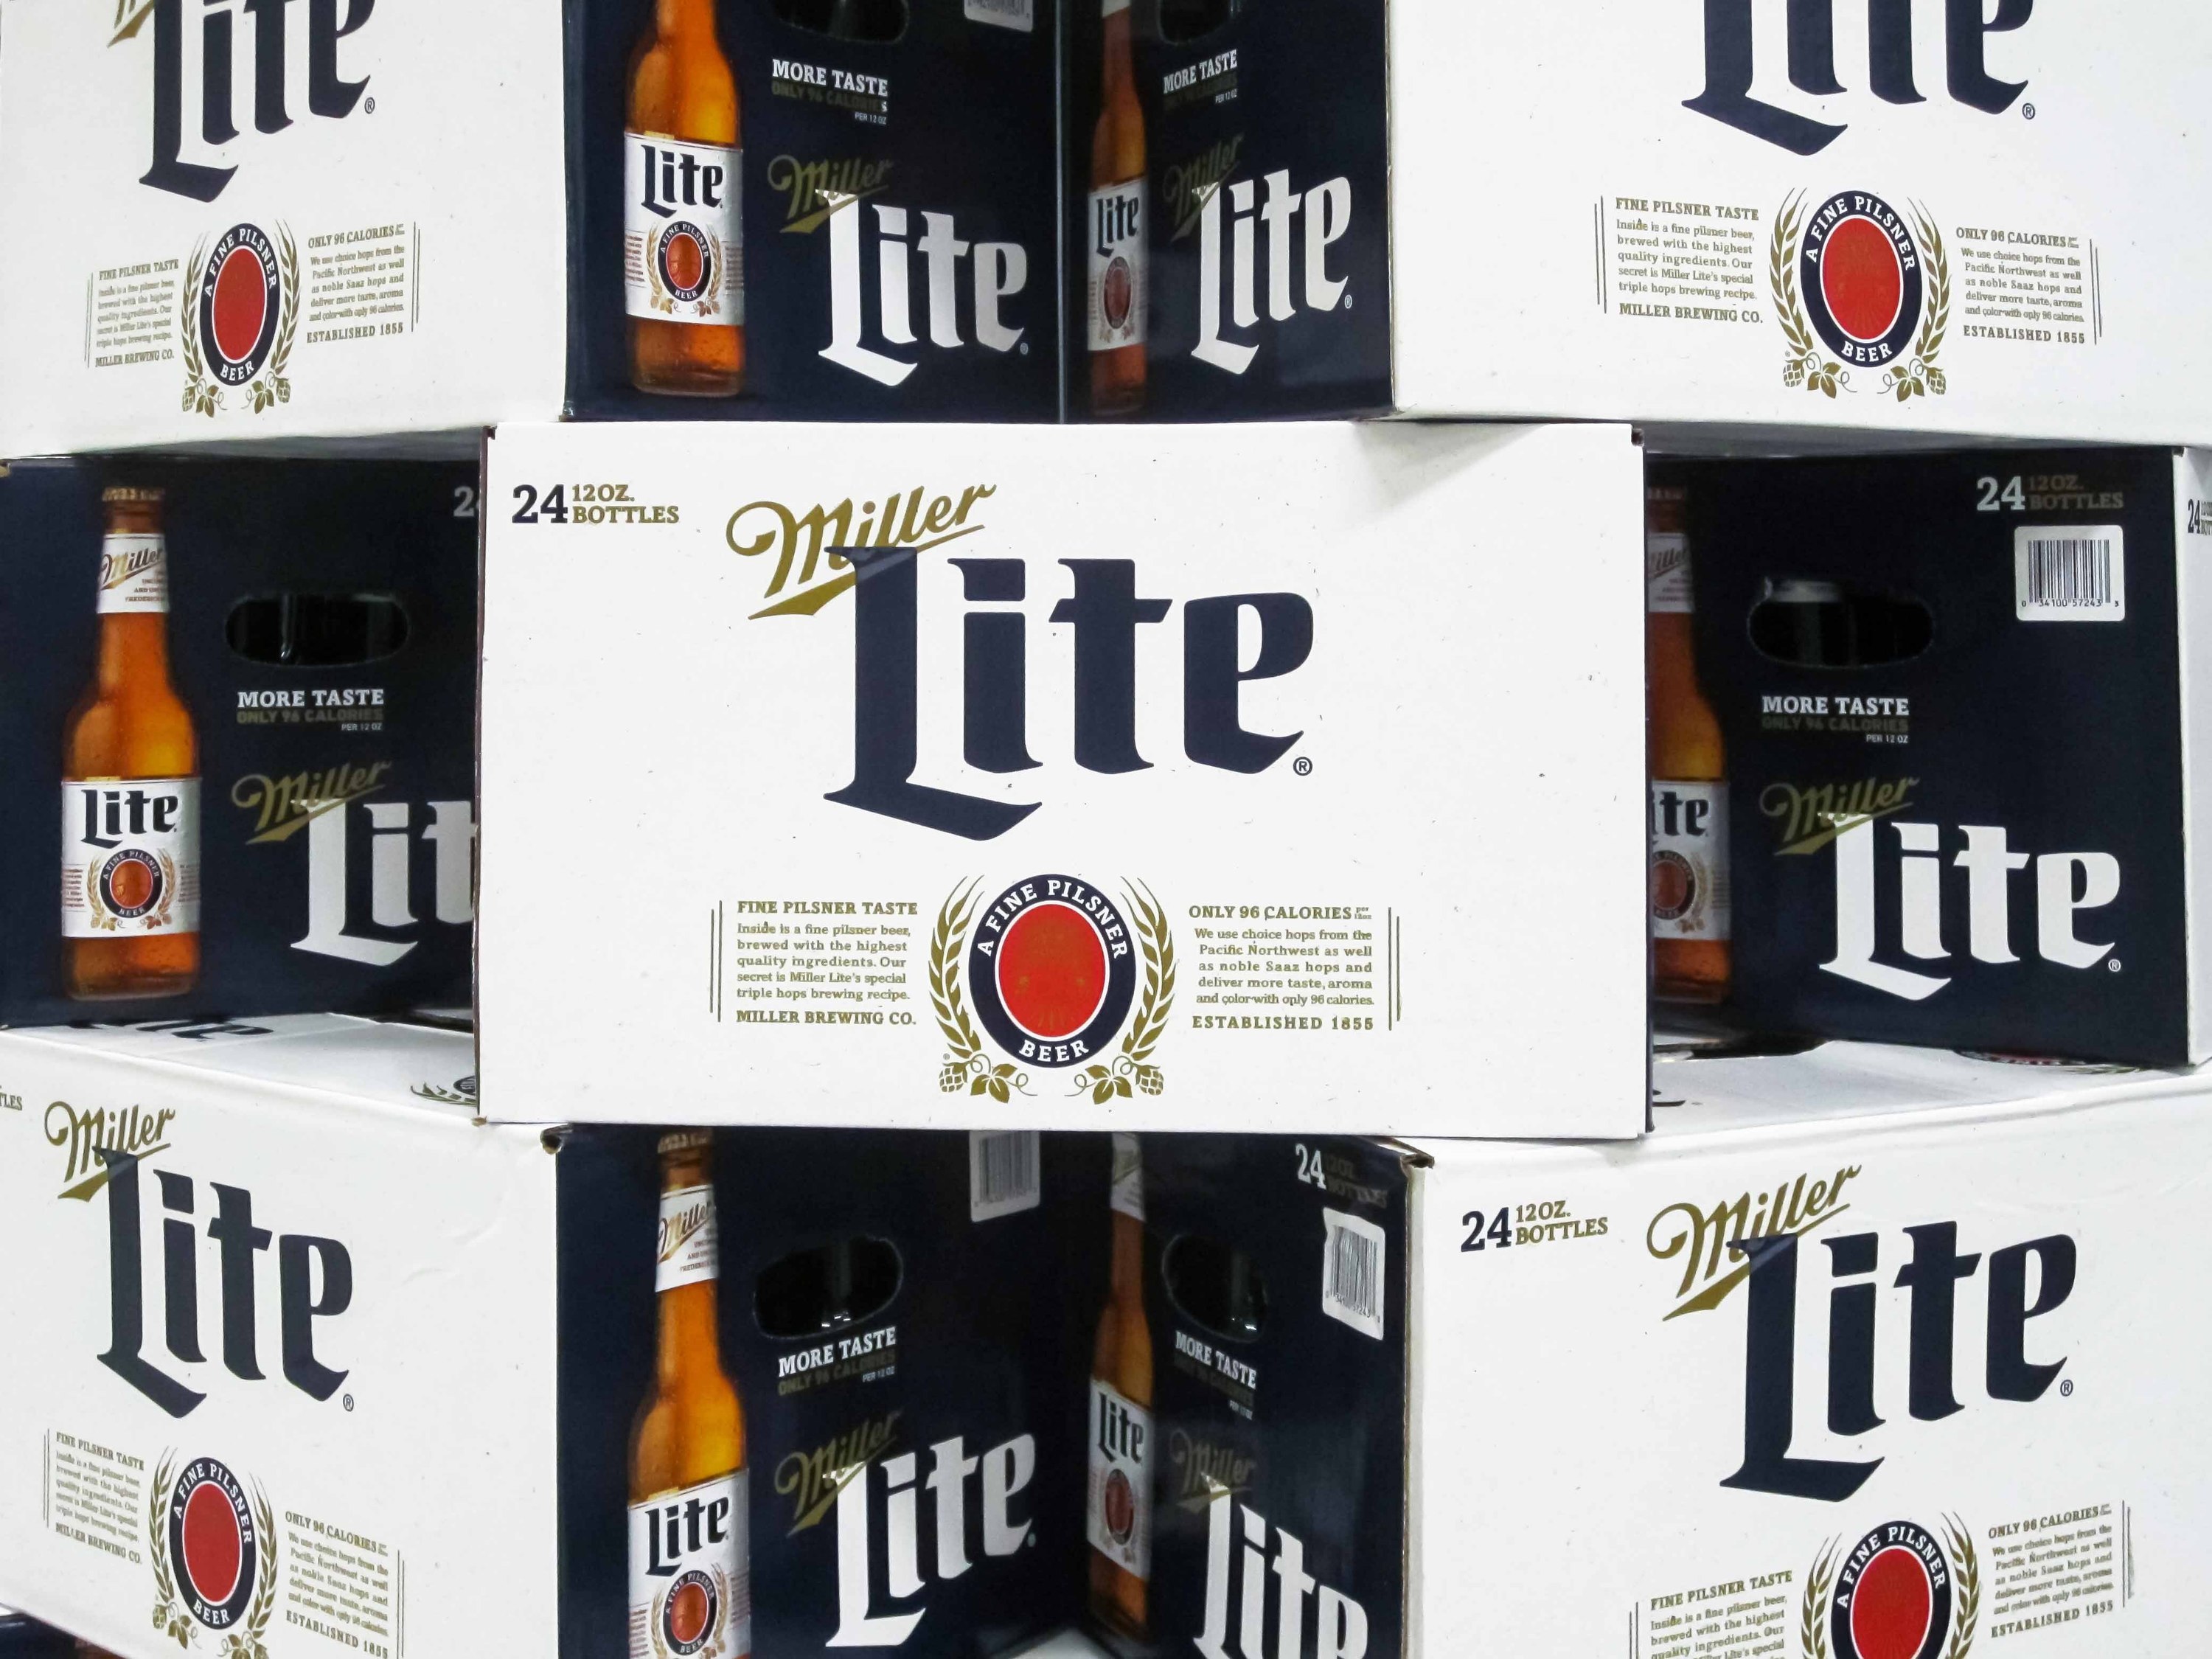 Miller Lite is giving away free beers to folks who live in these 80 cities.